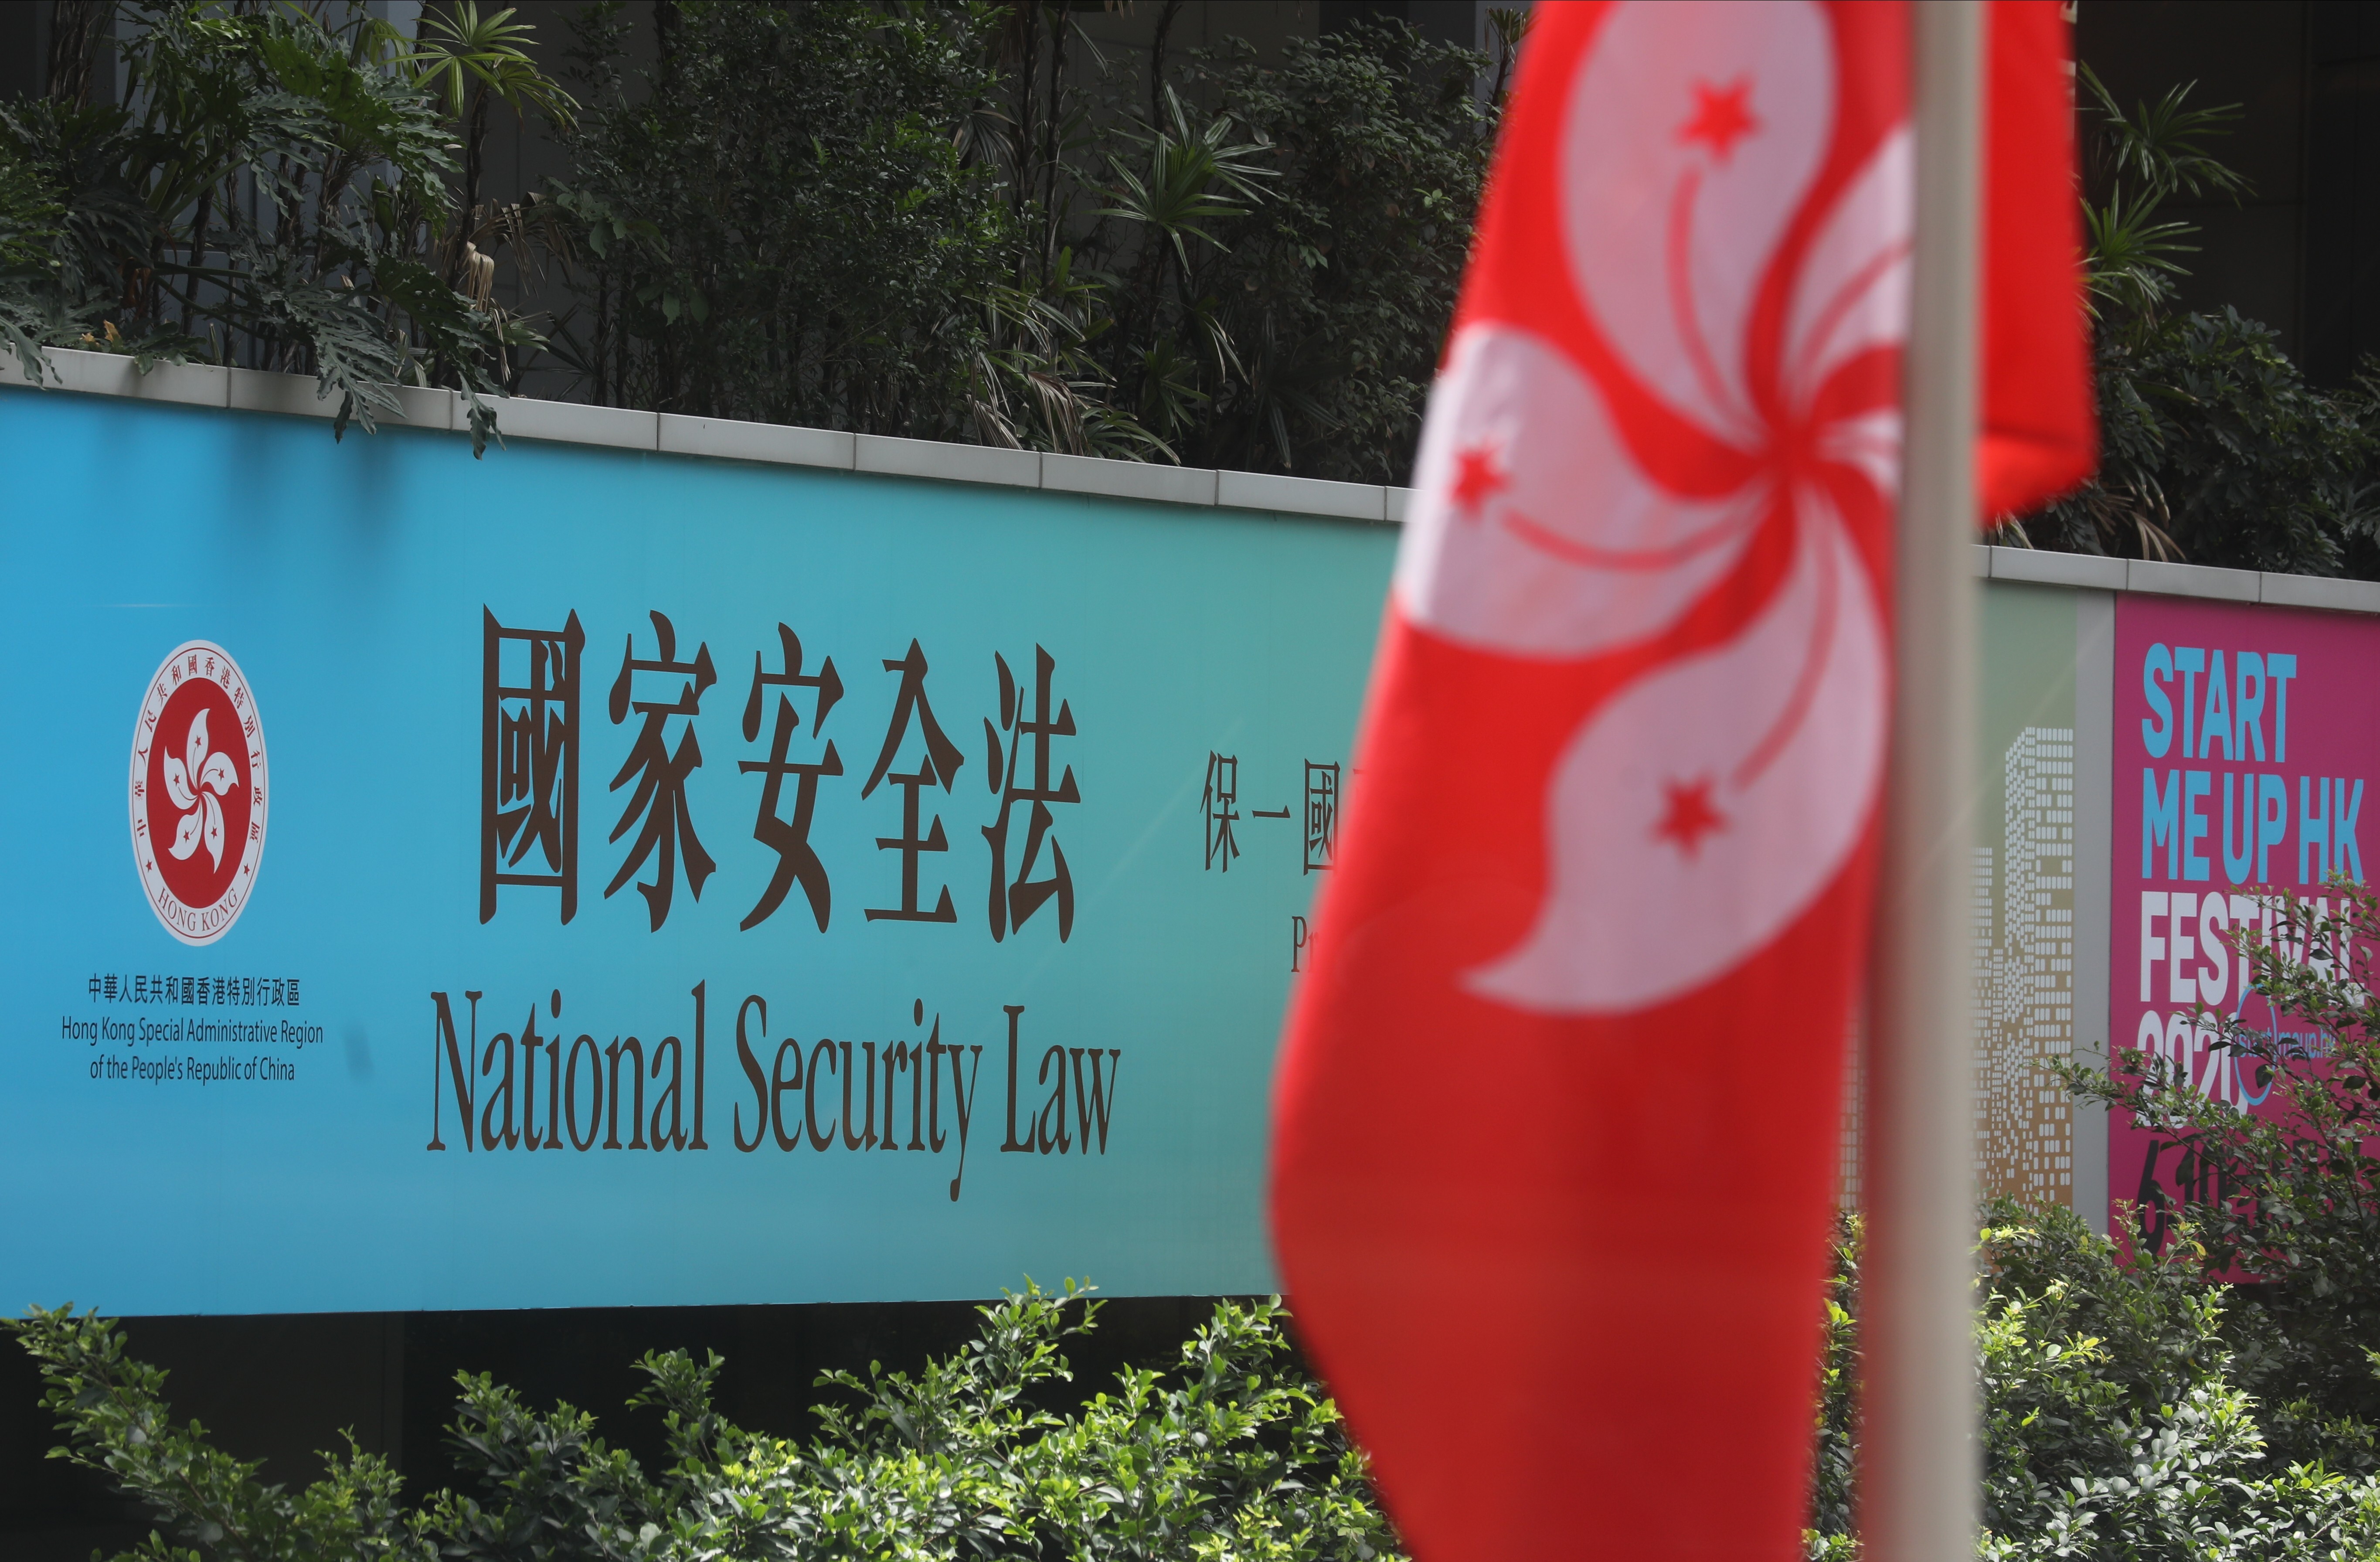 In the year since its introduction, the national security law has left few facets of Hong Kong society untouched. Photo: Dickson Lee